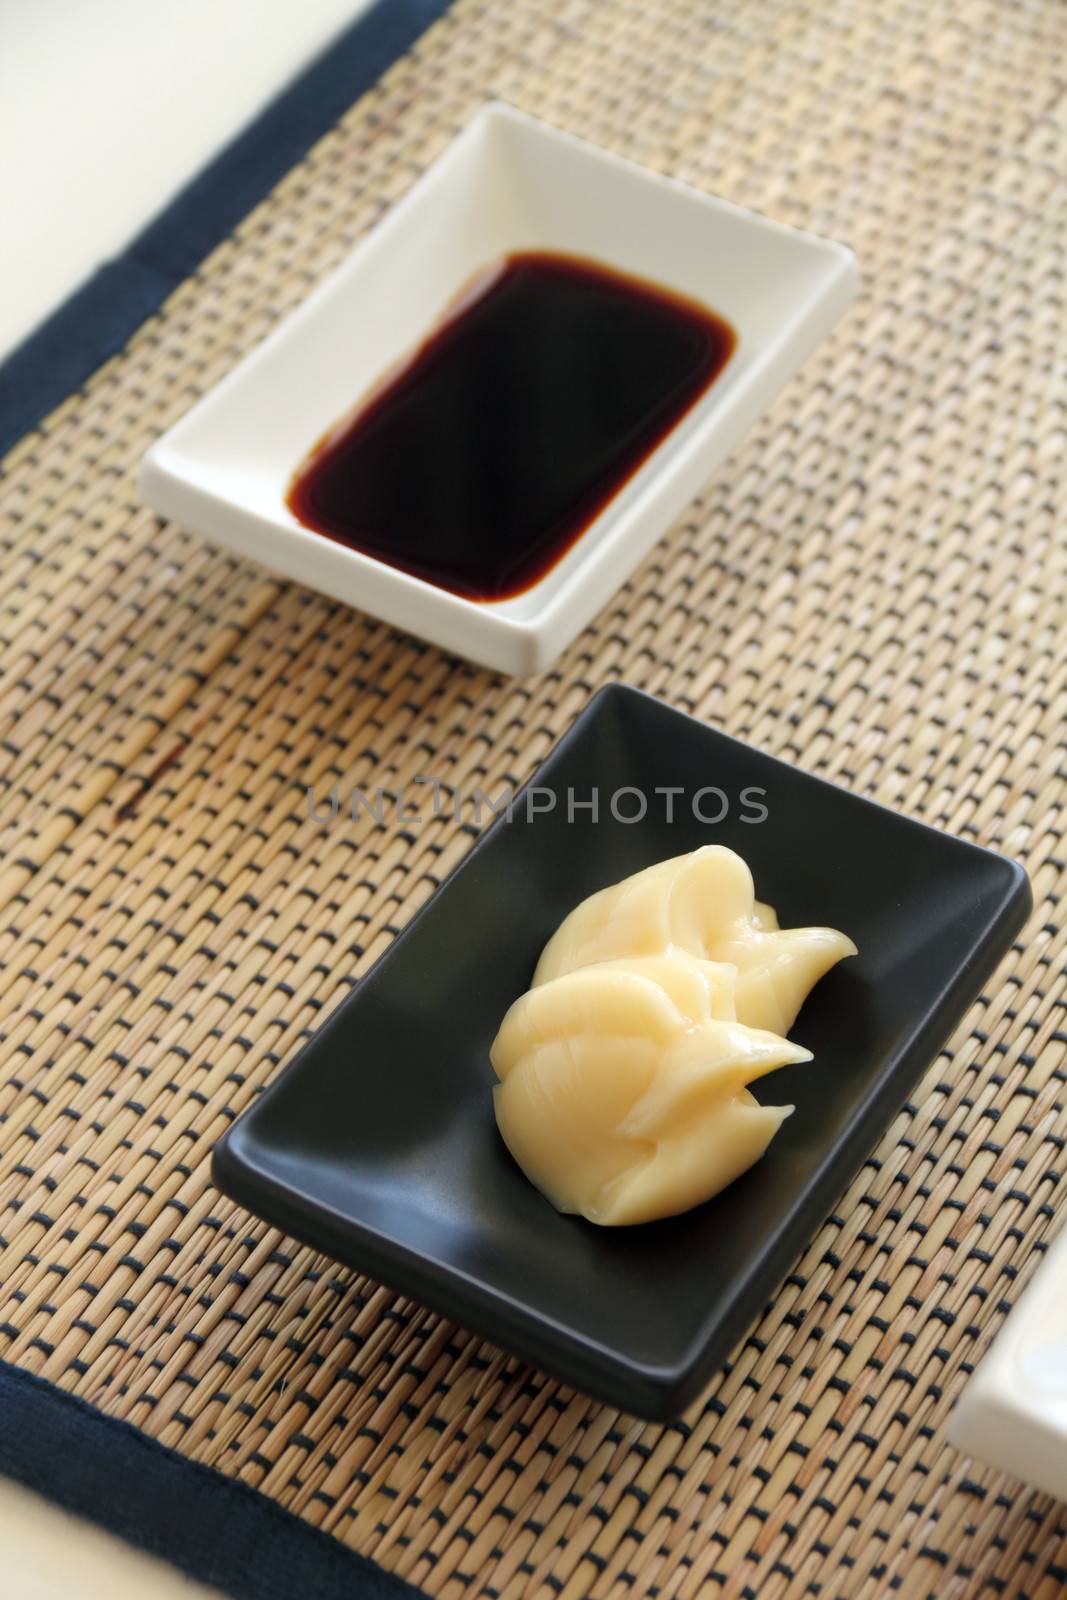 Japanese condiments comprising soy sauce and Japanese mayonnaise as dipping sauces.